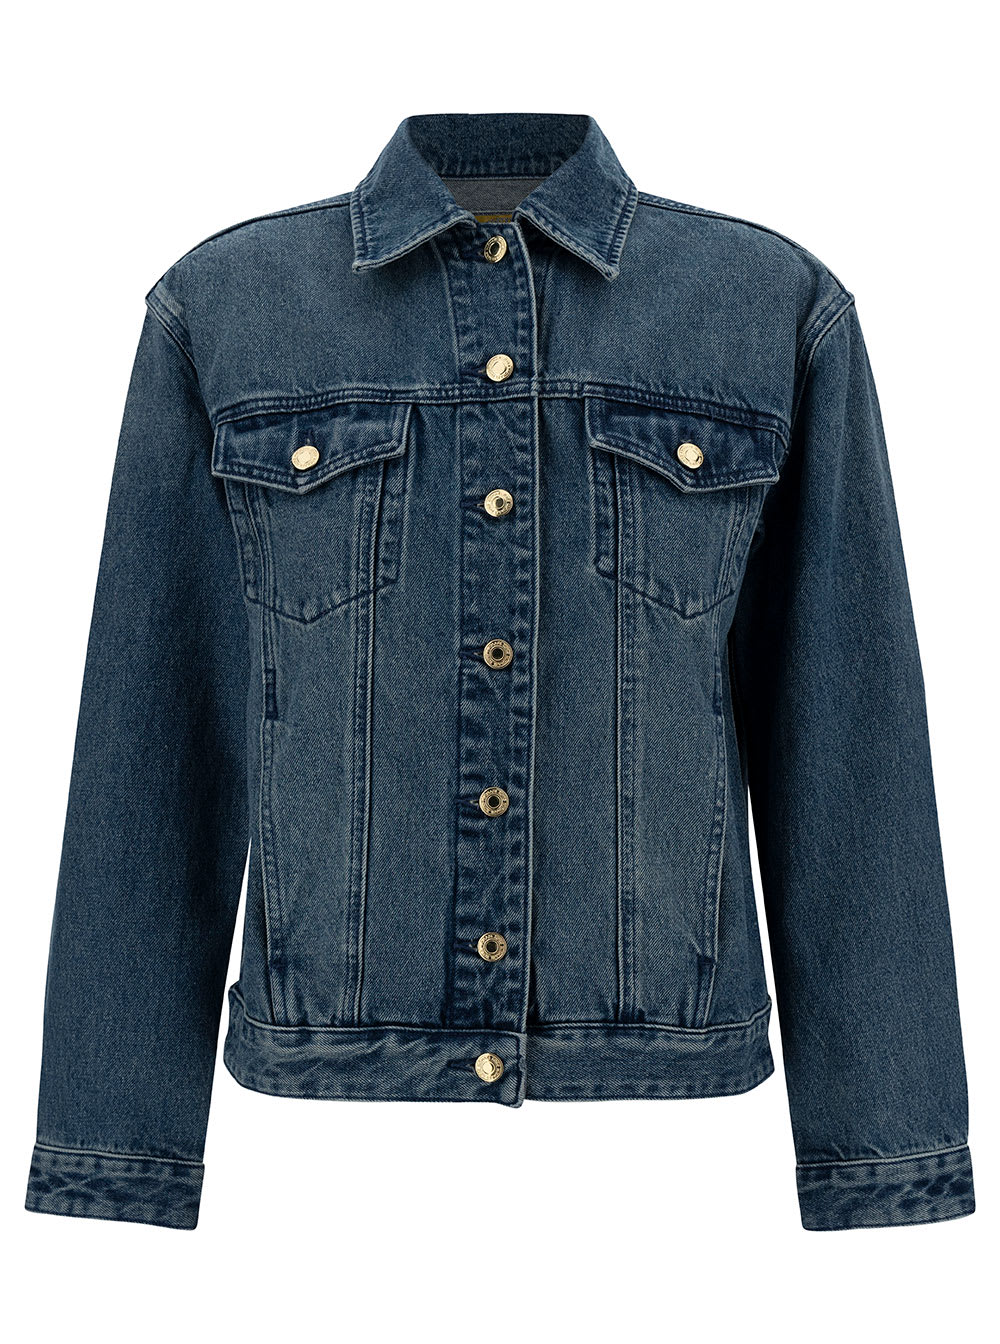 Blue Jacket With Classic Collar And Buttons In Cotton Denim Woman